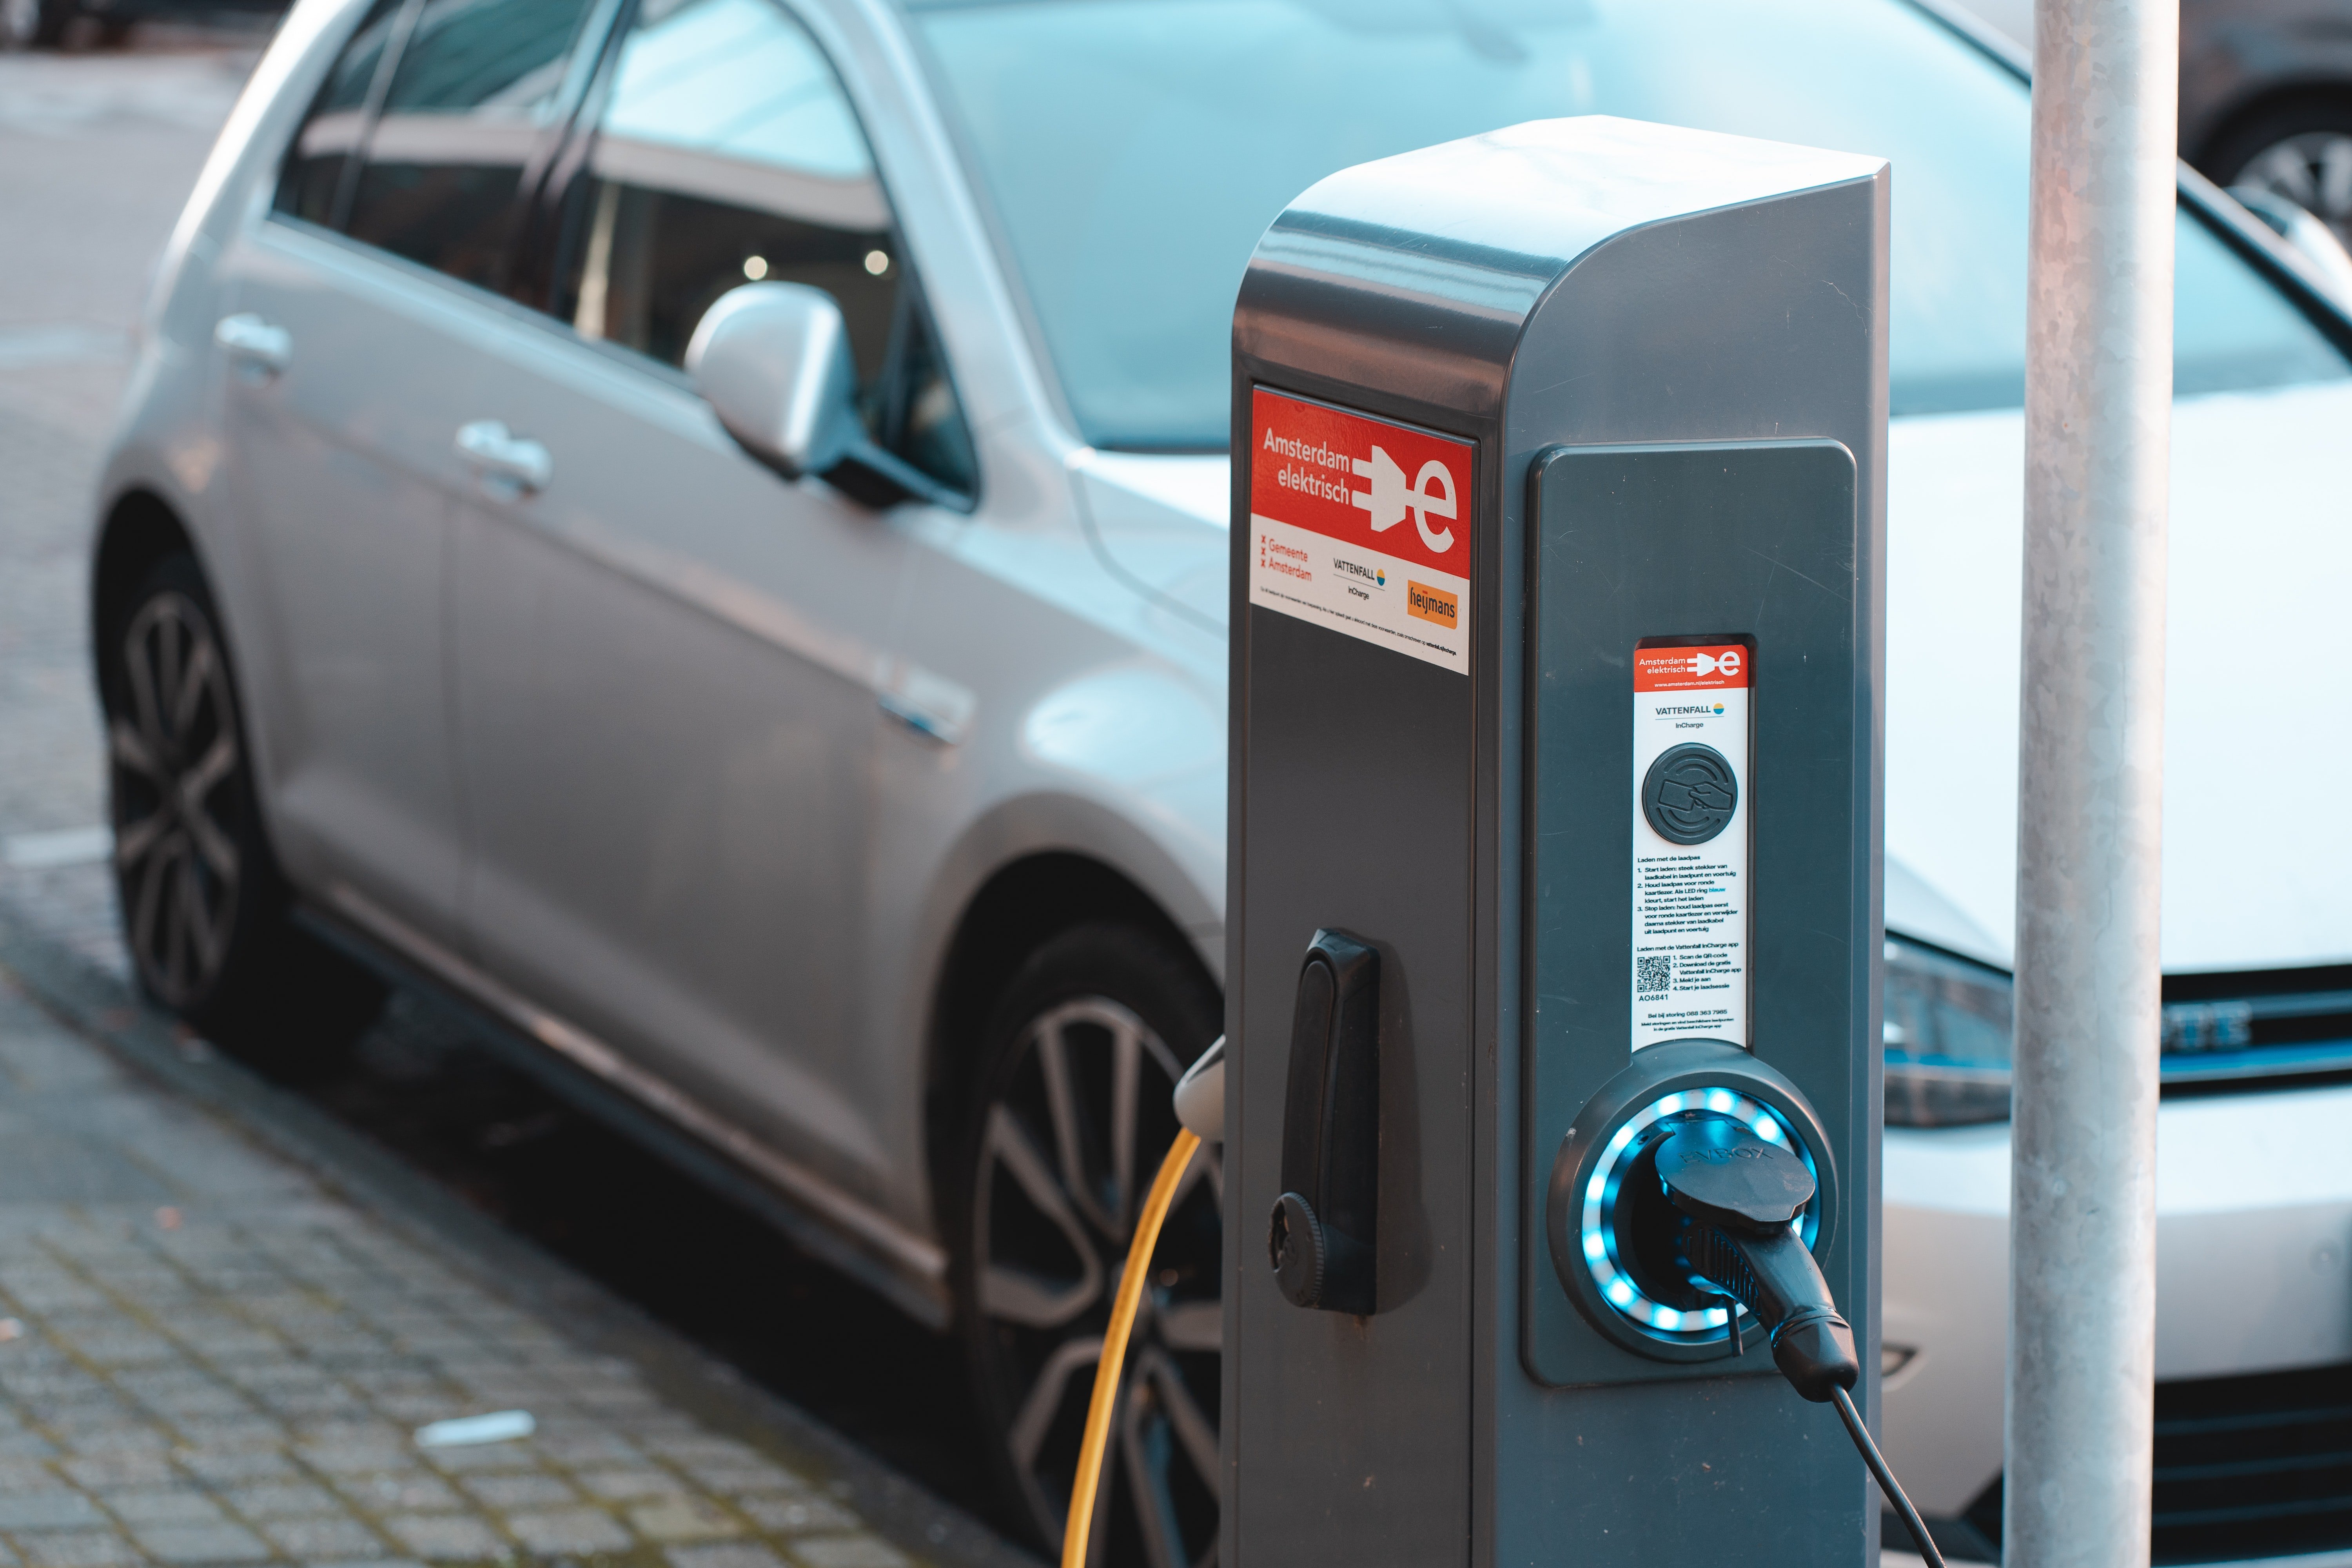 Eletric car being charged | Source: Unsplash